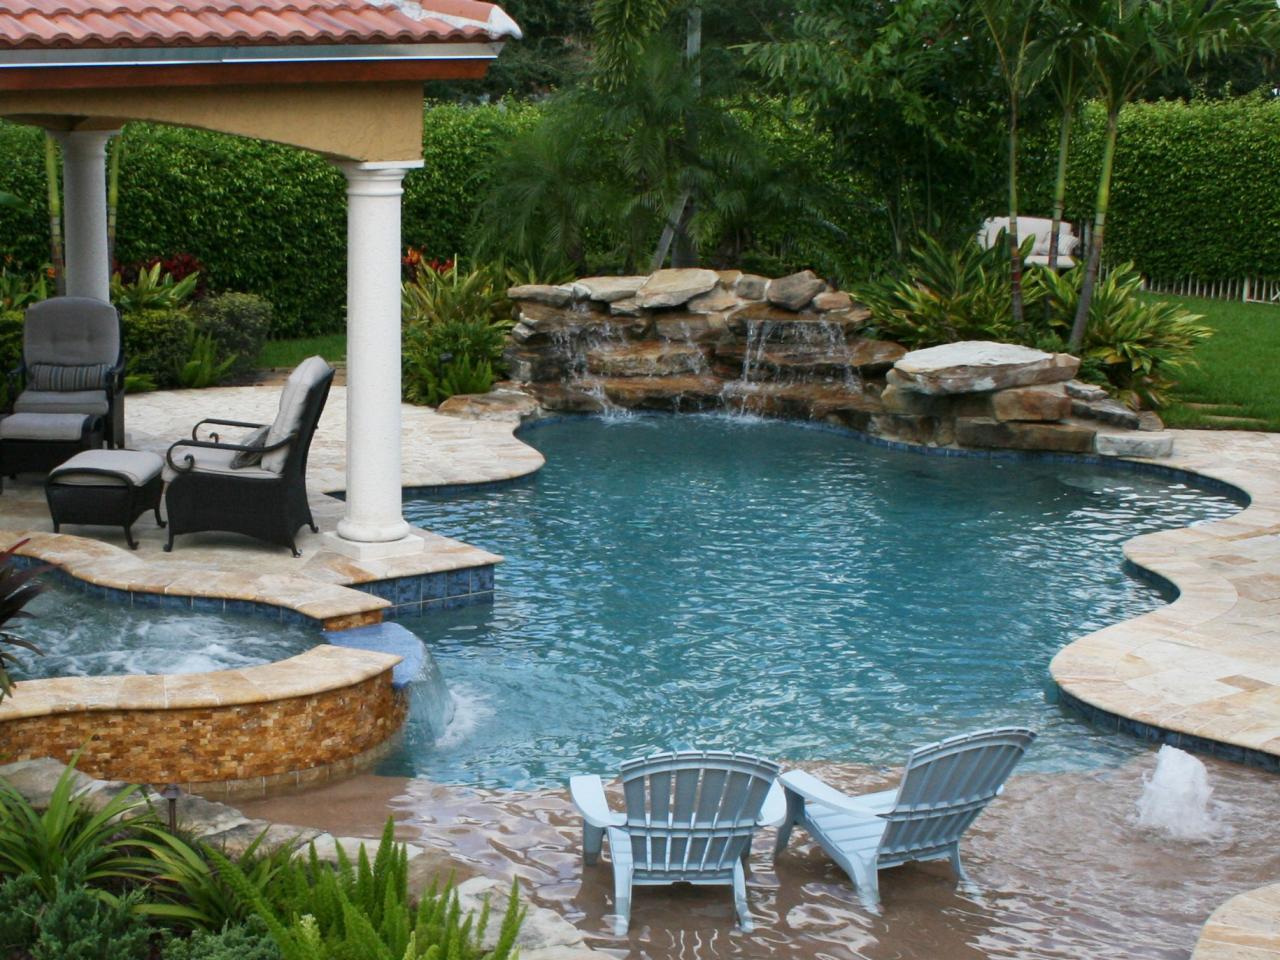 In-Ground vs. Above-Ground Pools | Outdoor Design ...